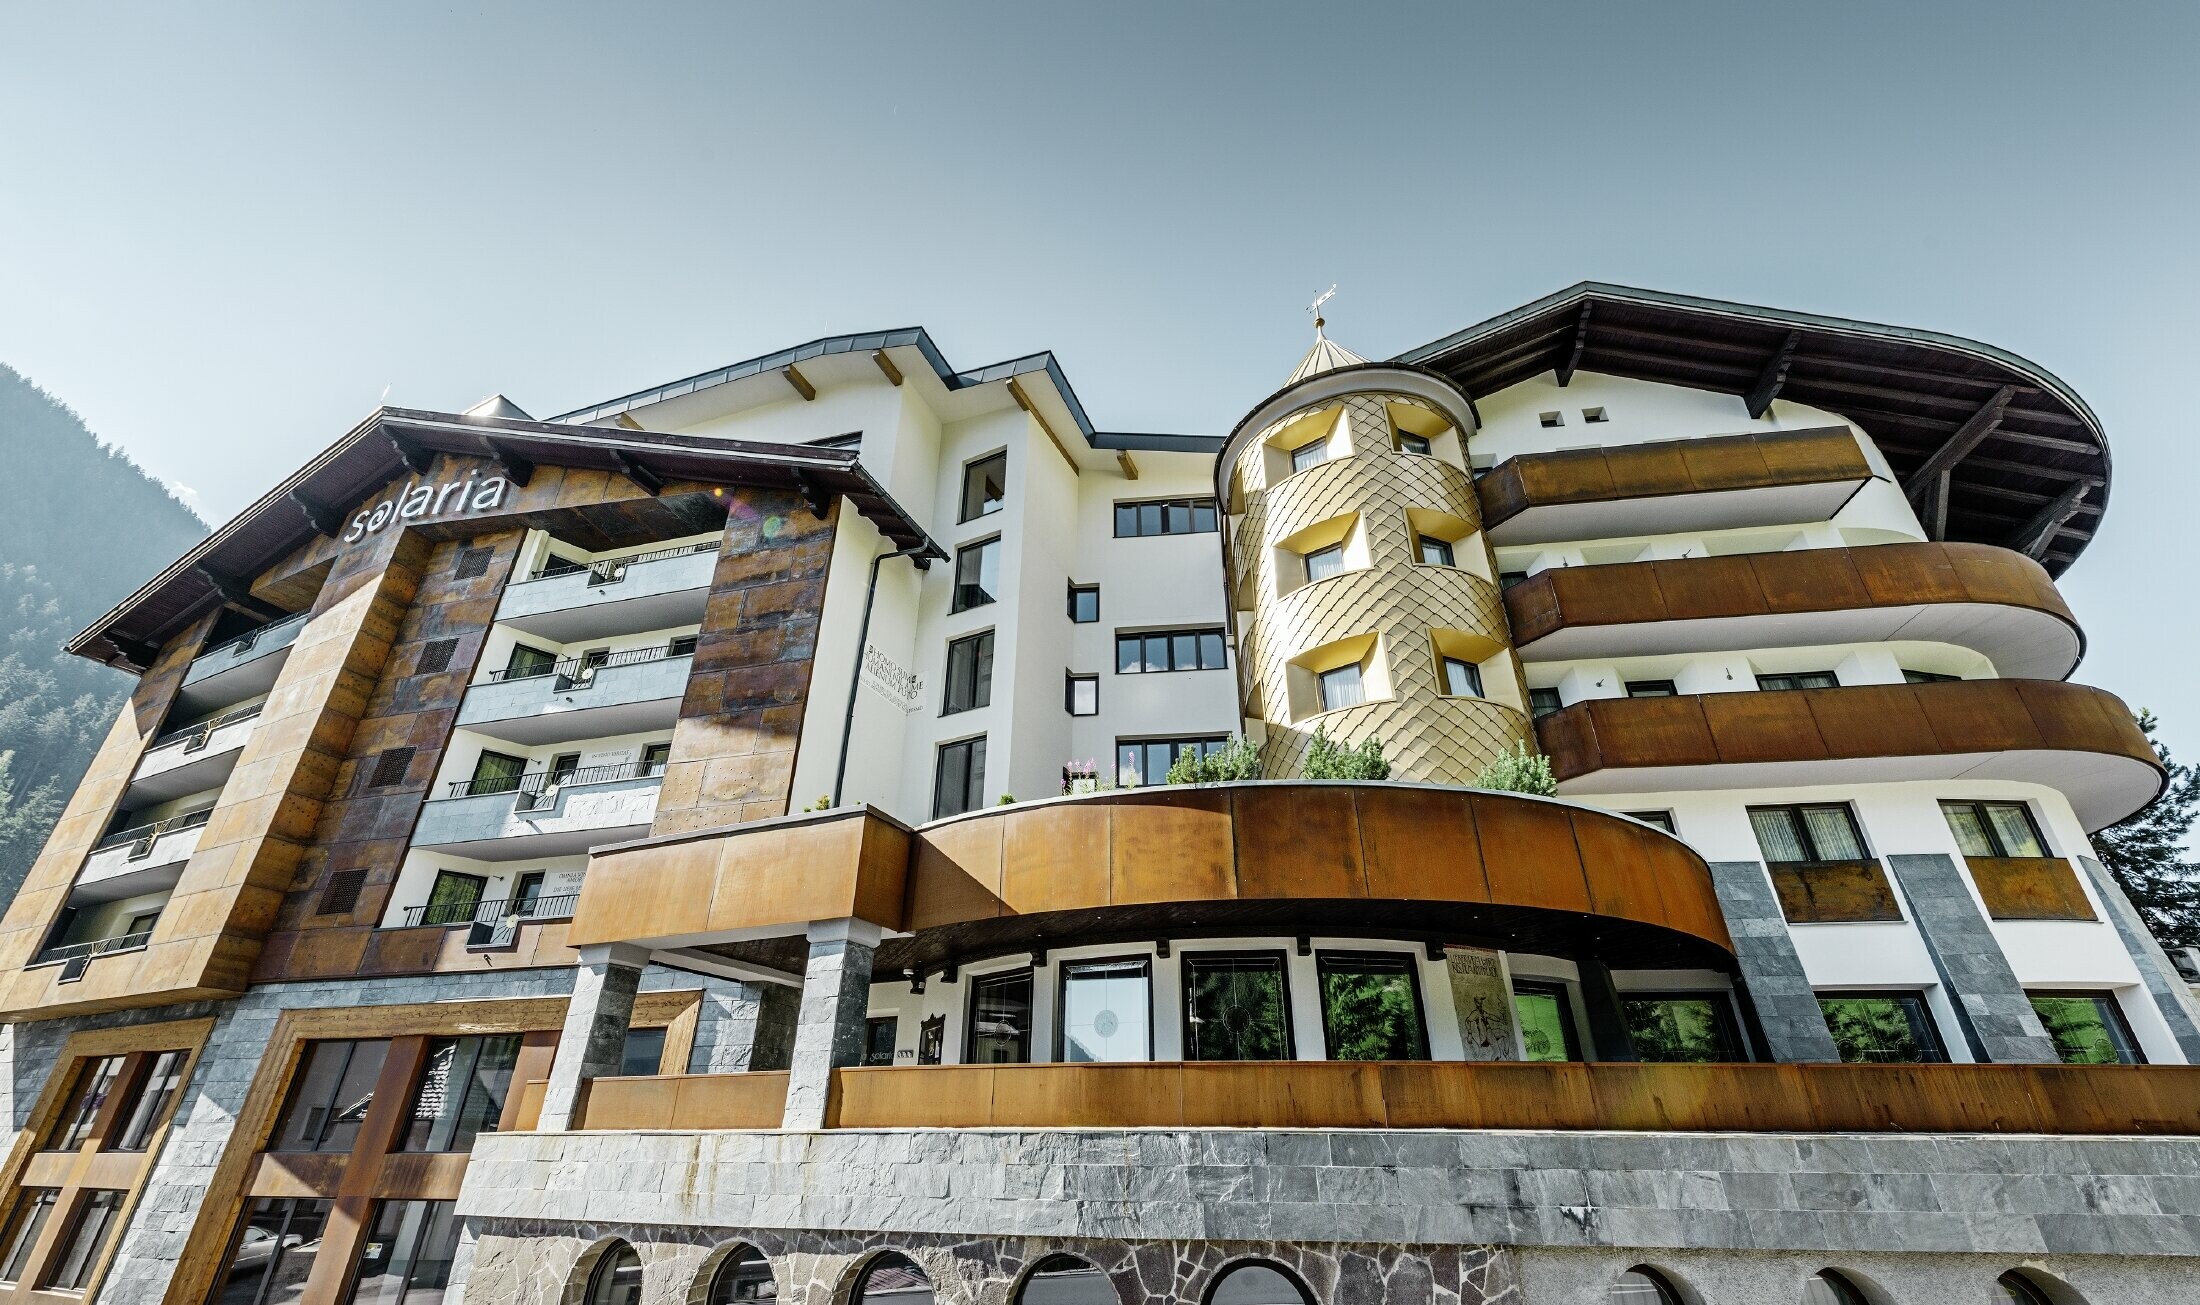 Traditional hotel in Ischgl (Austria) with wooden balconies, a wooden façade and tower clad in PREFA gold-coloured aluminium panels